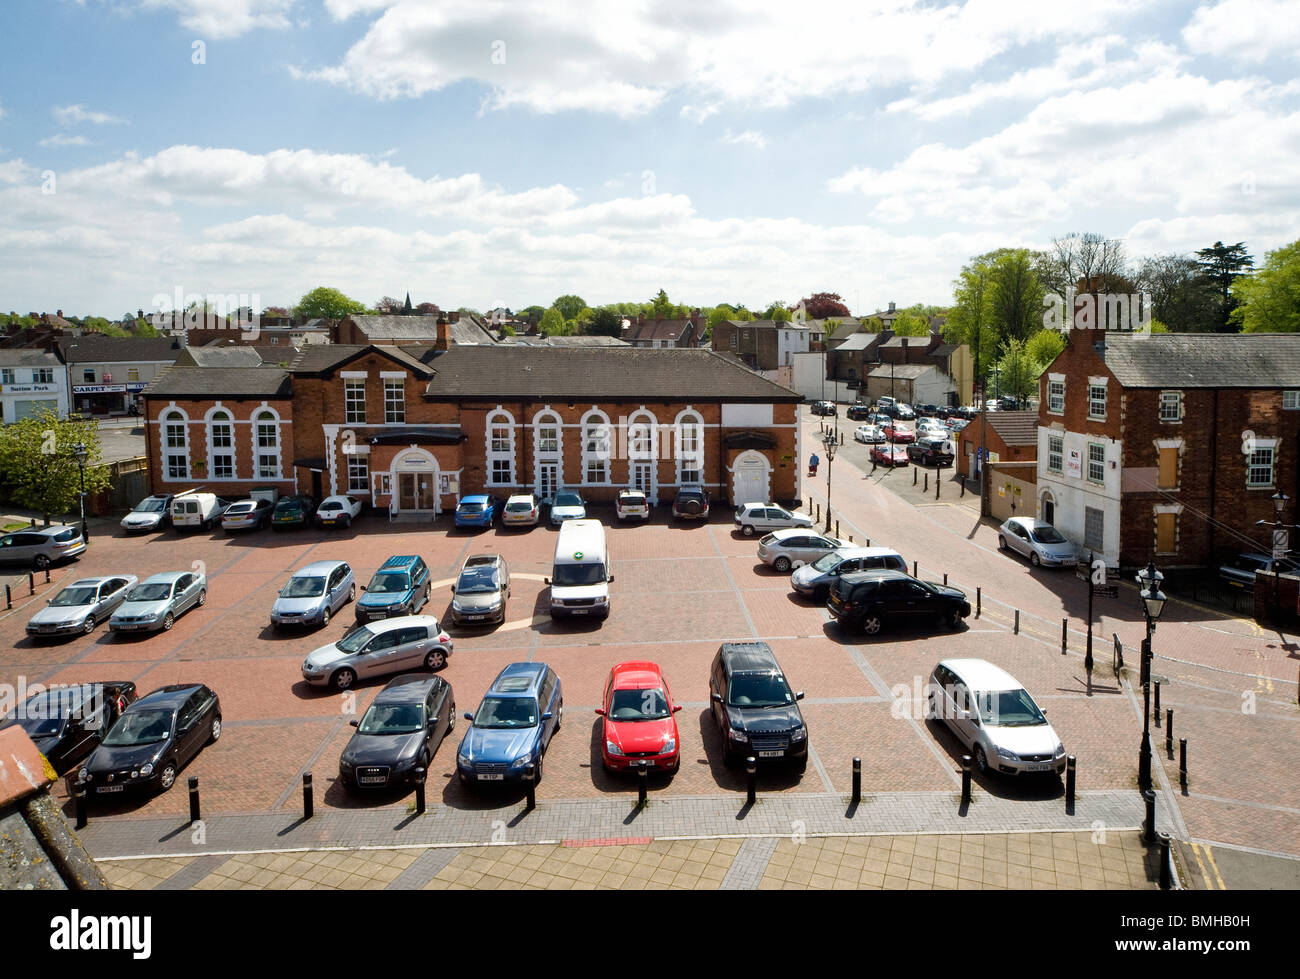 Looking down at central car park in Rugby, East Midlands, UK Stock Photo